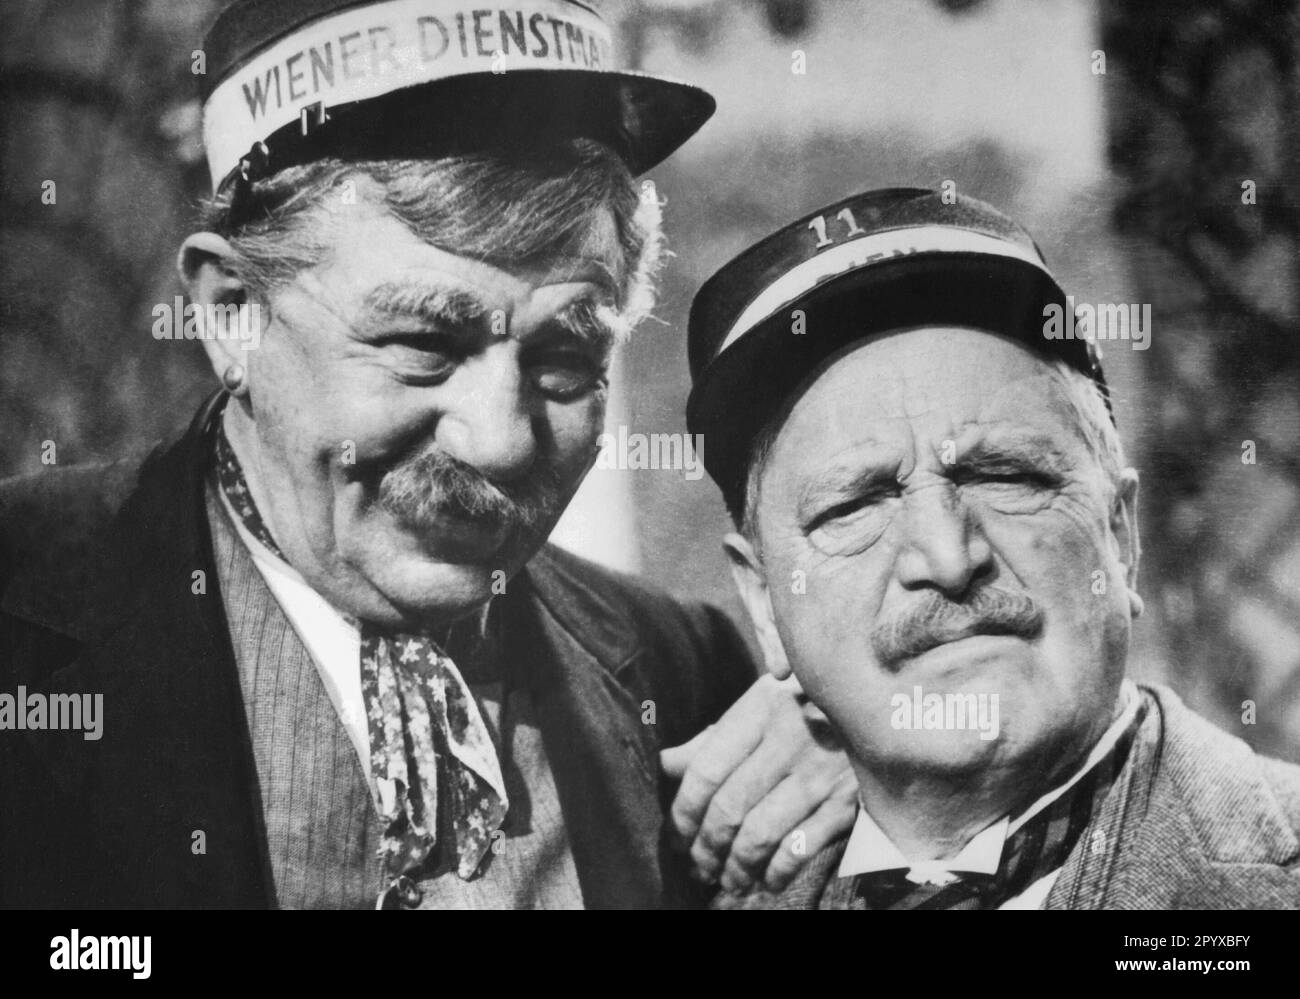 Paul Hörbiger (left) and Hans Moser in 'Hallo Dienstmann', directed by Franz Antel, Austria 1951. [automated translation] Stock Photo